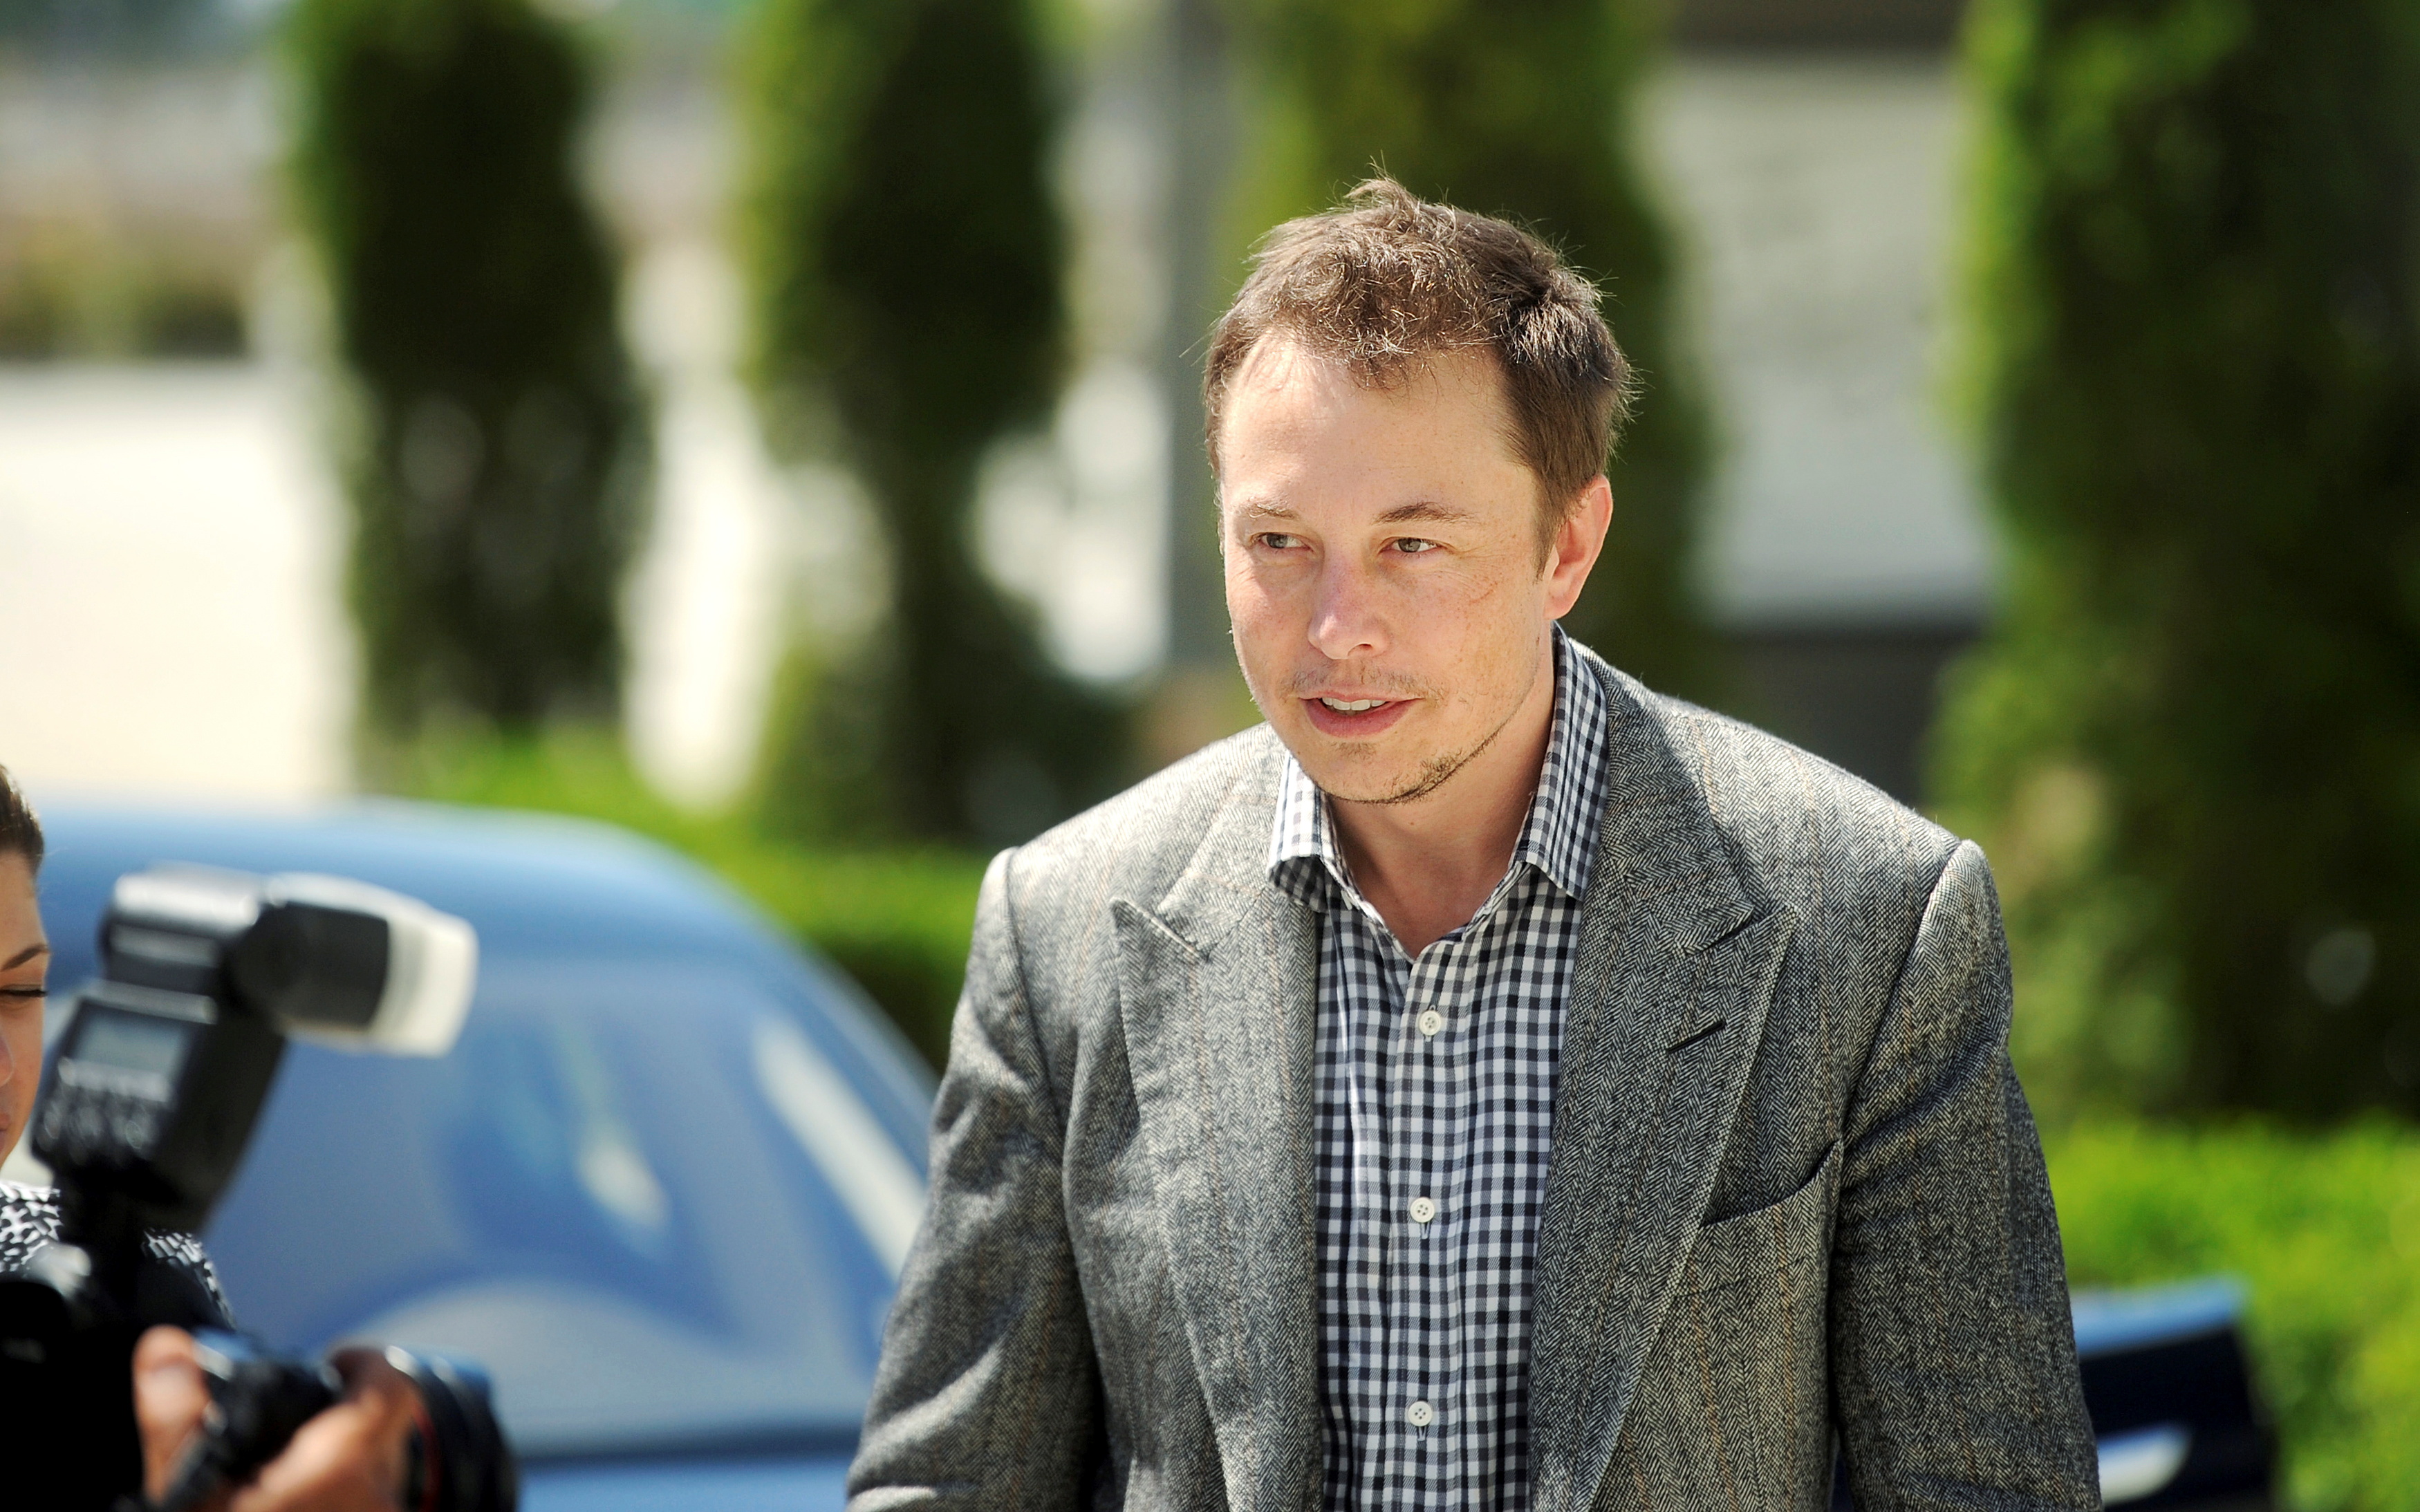 Tesla Chief Executive Officer Elon Musk leaves a press event at his company's factory in Fremont